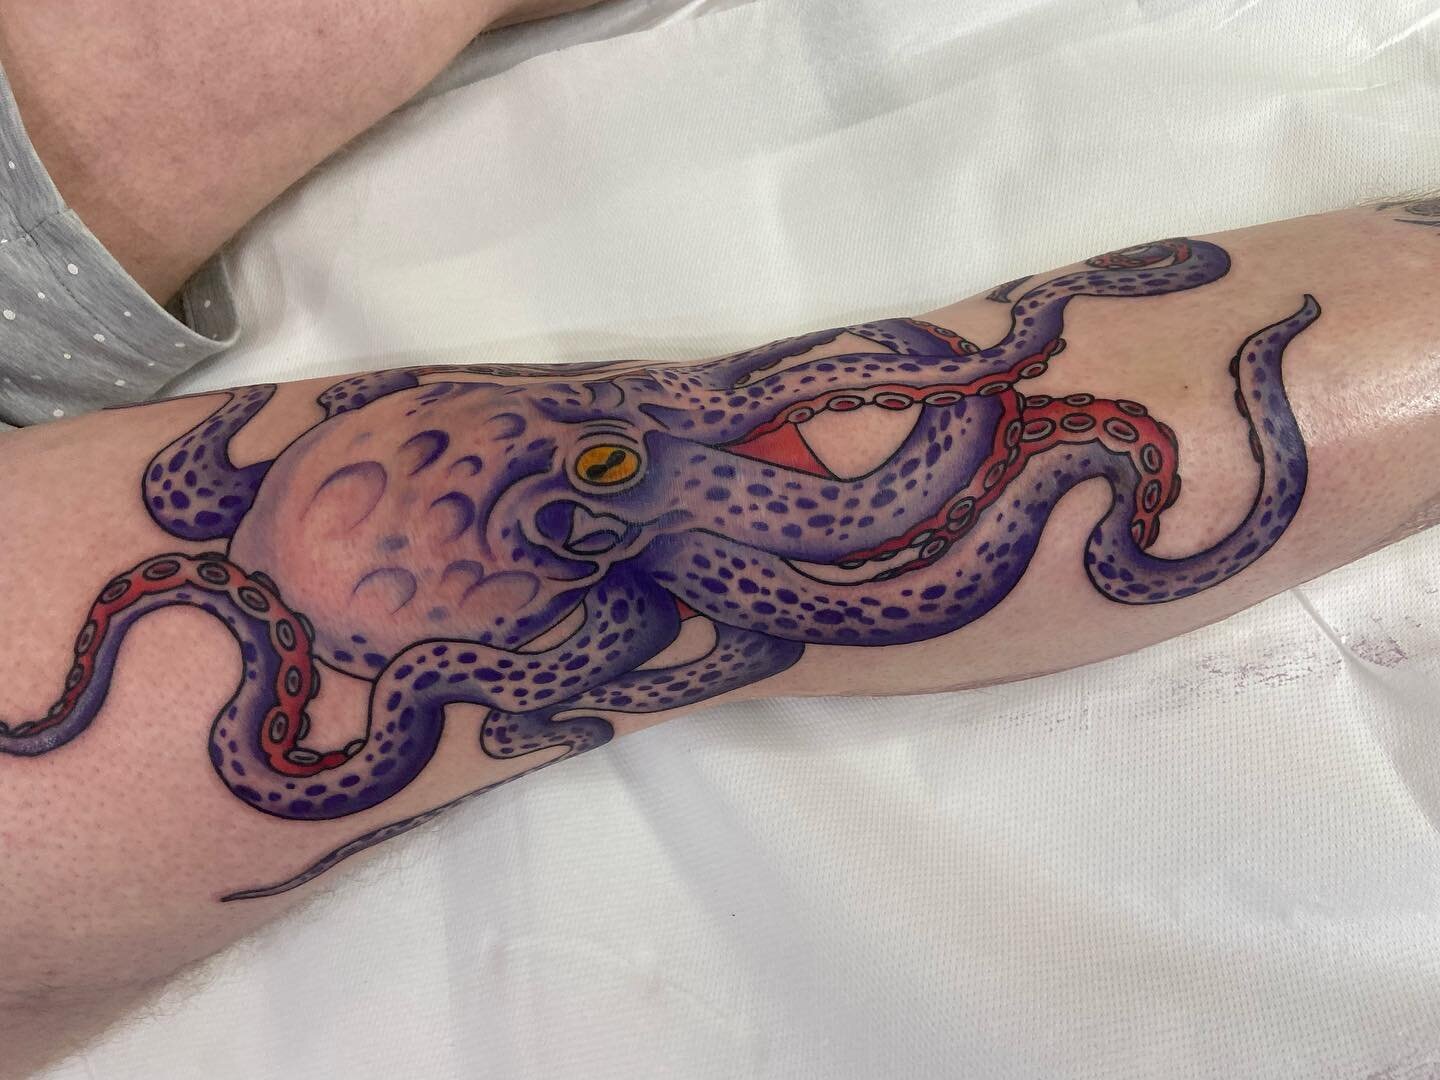 Octopus on the knee by @olliemakestattoos